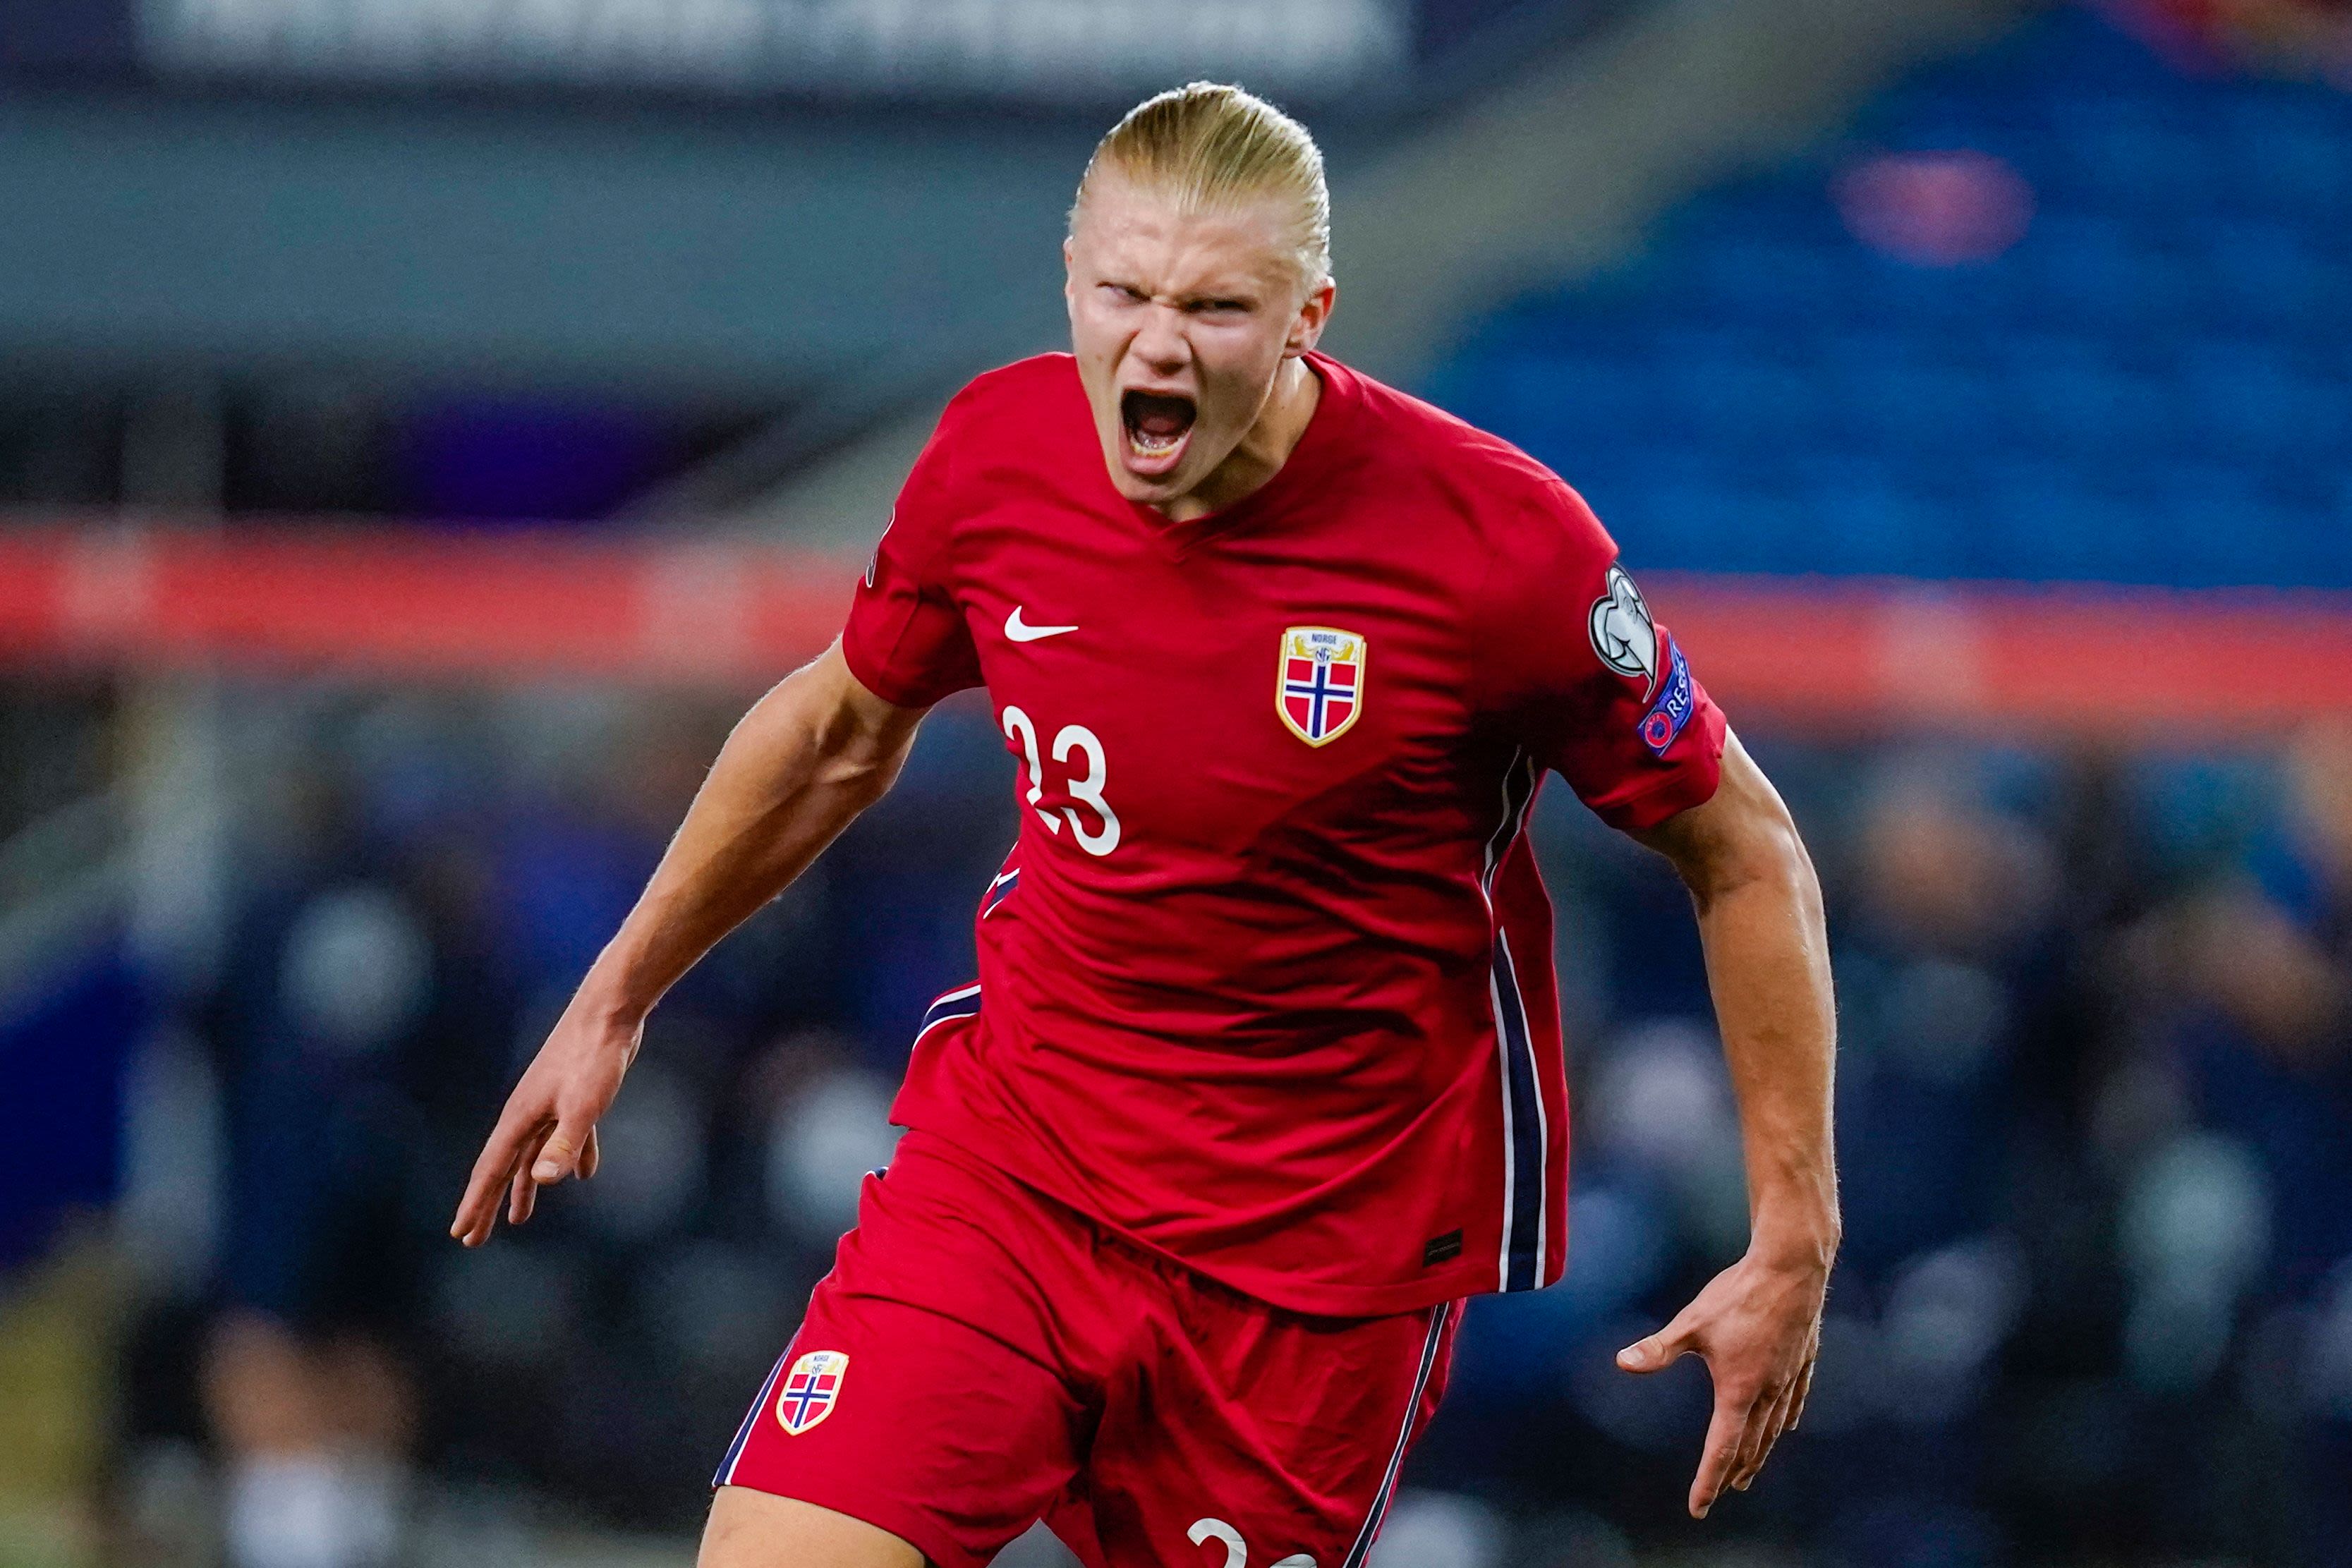 Why Erling Haaland isn't competing at the World Cup